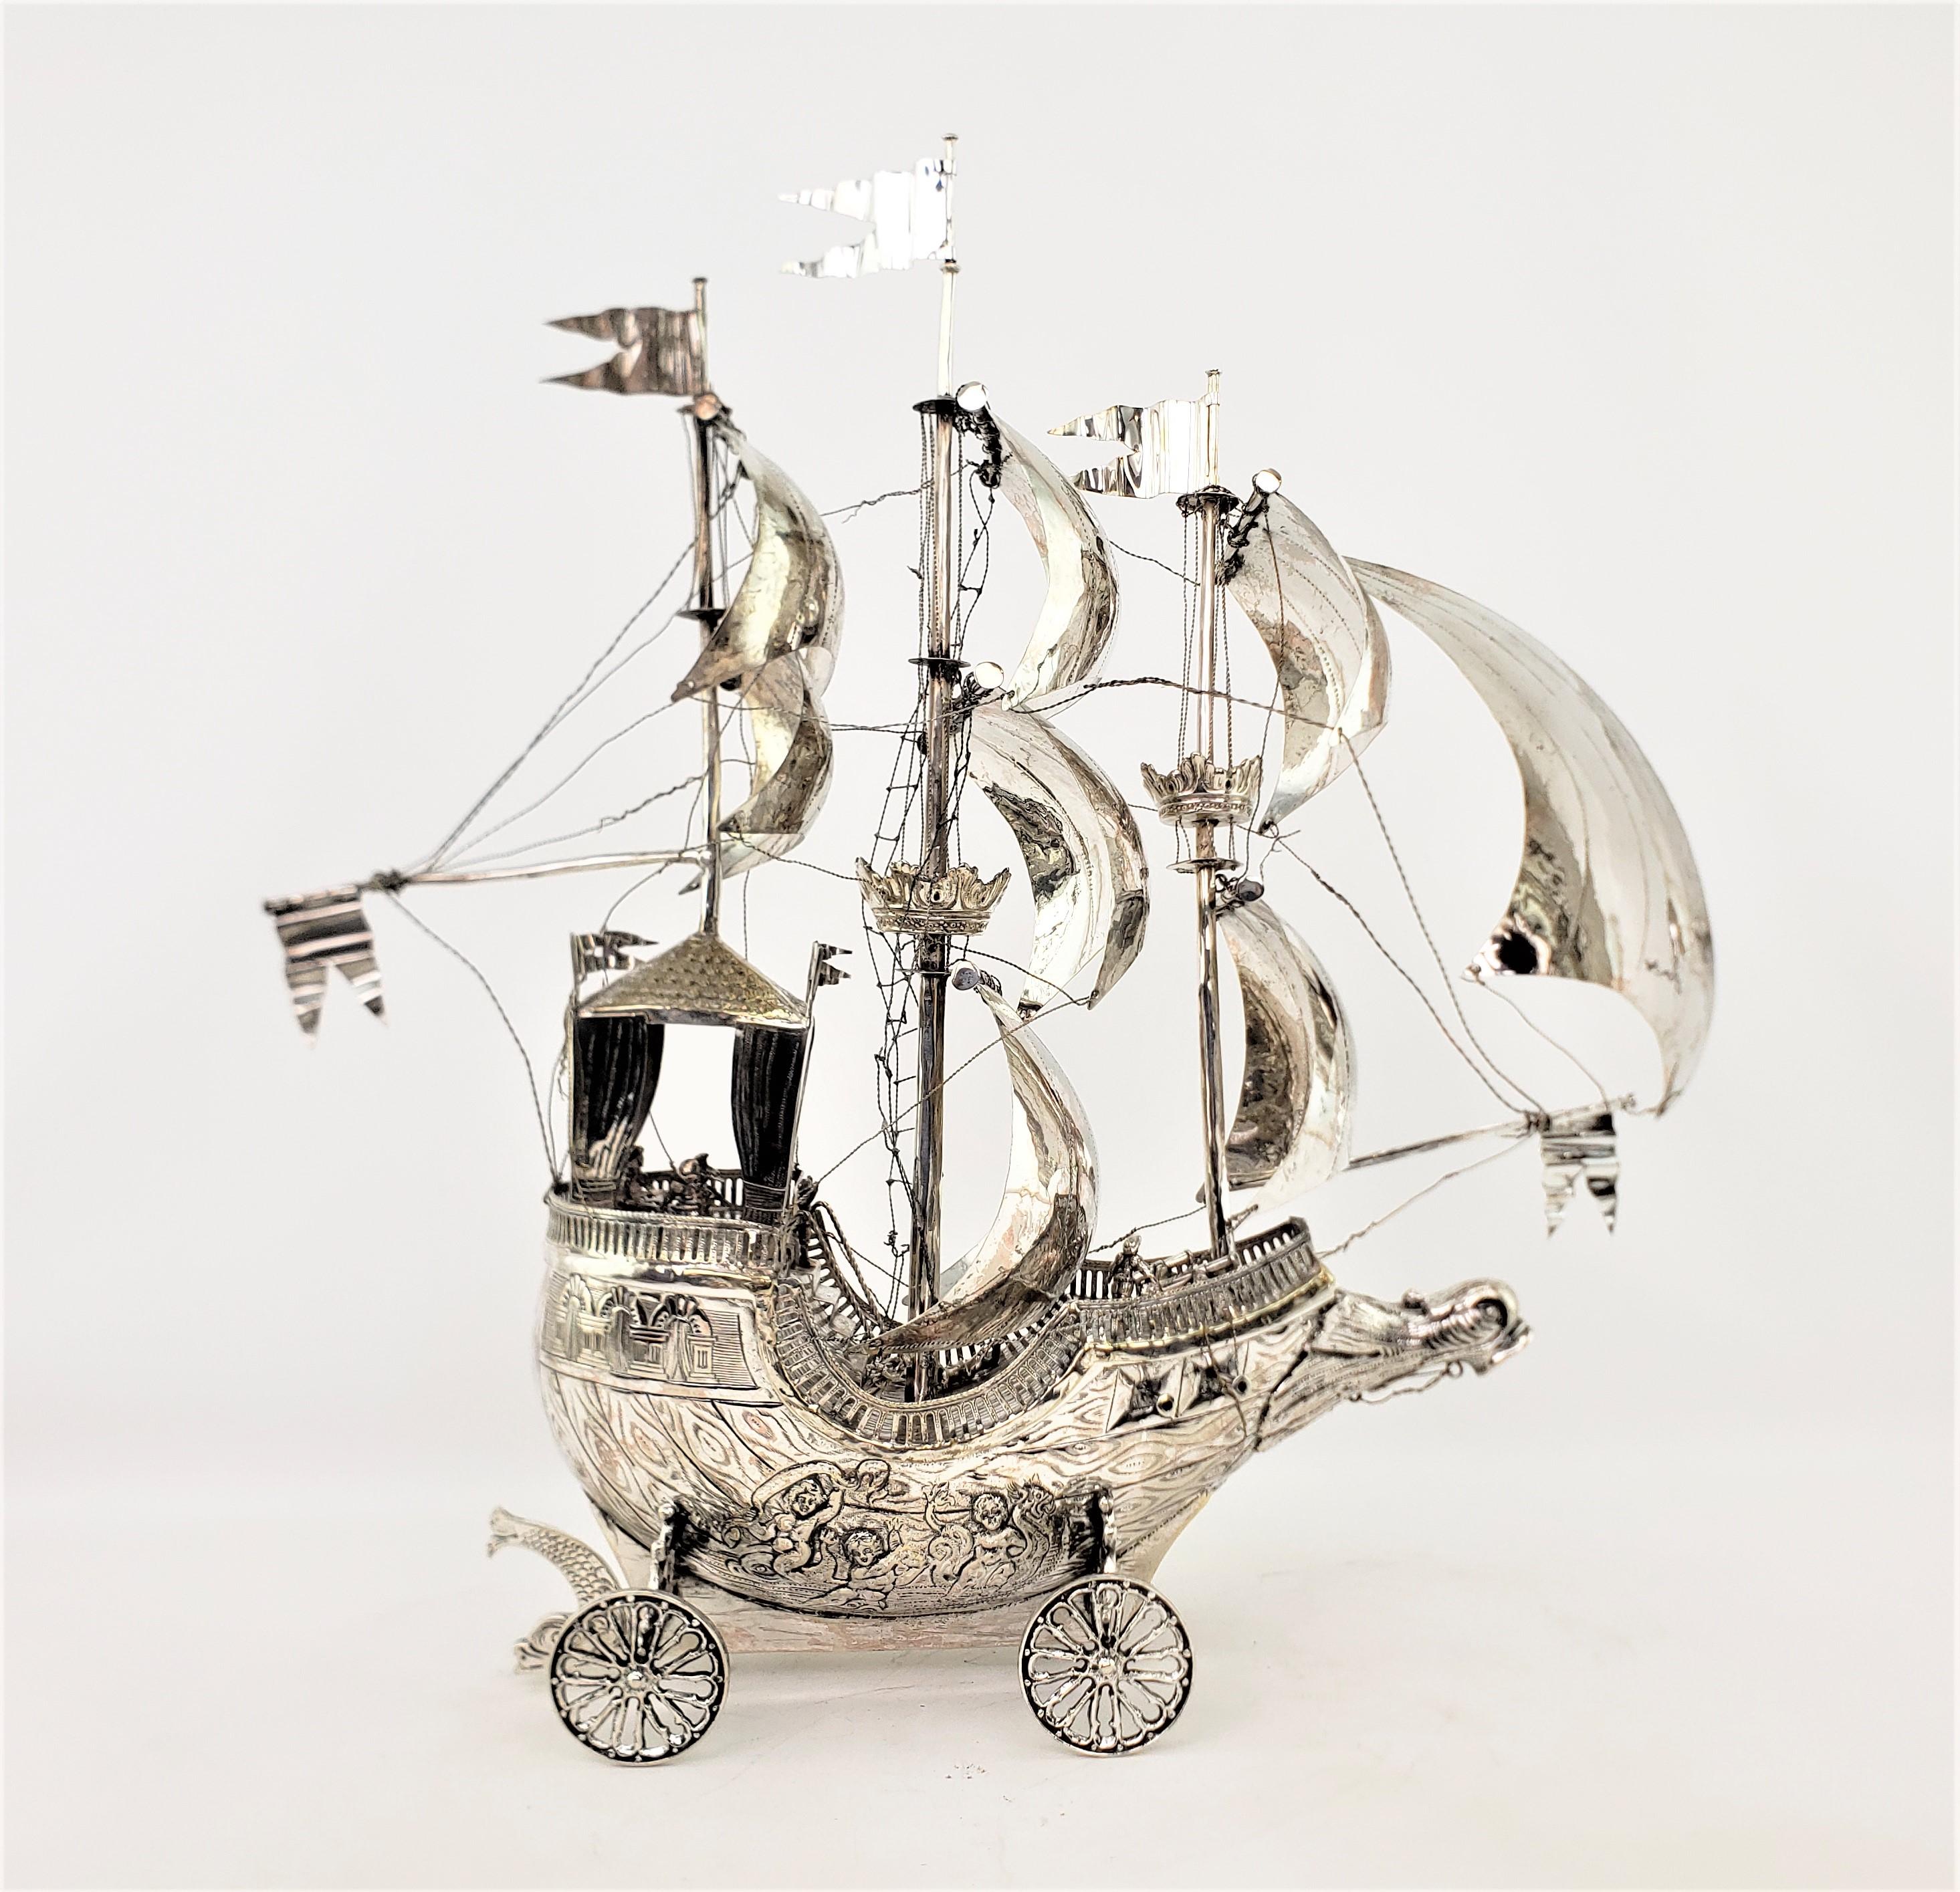 20th Century Large Antique Silver Plated Nef or 3 Mast Sailing Ship Sculpture or Centerpiece